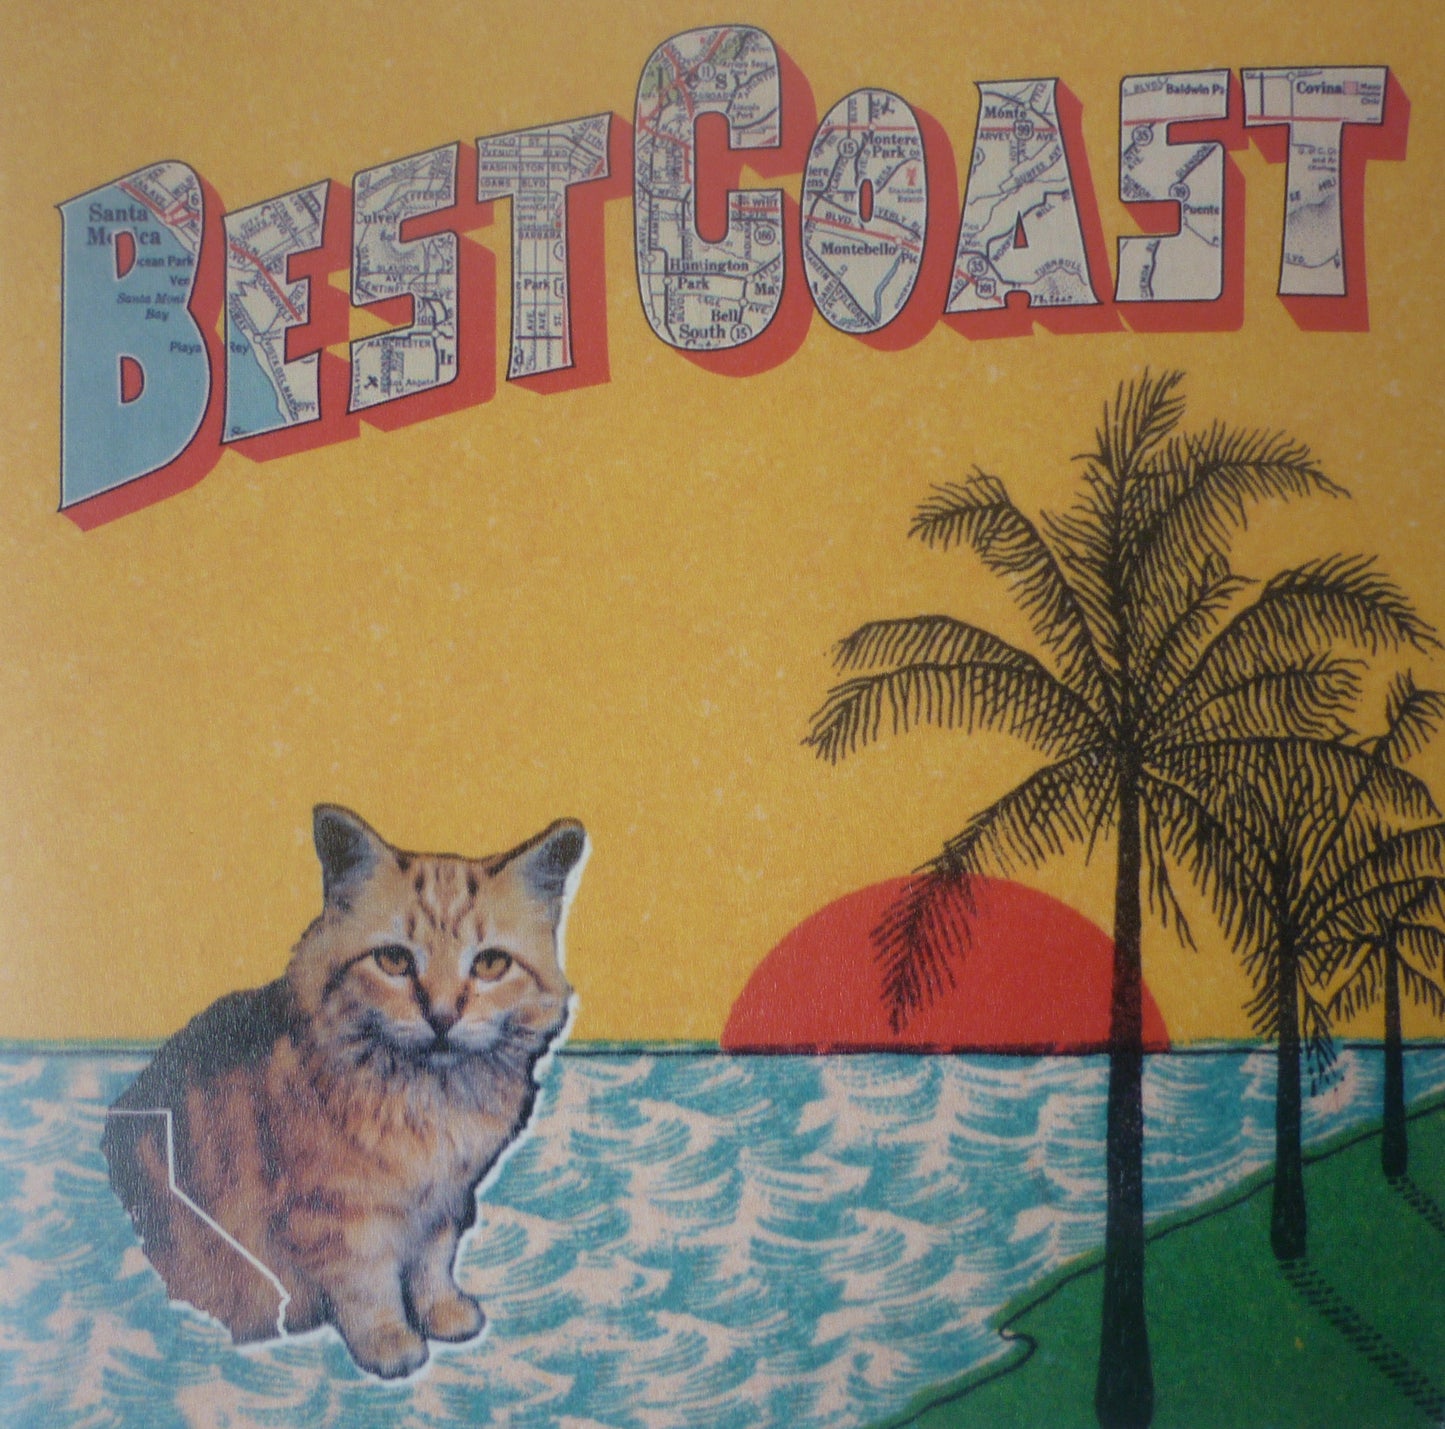 Best Coast - Crazy for You